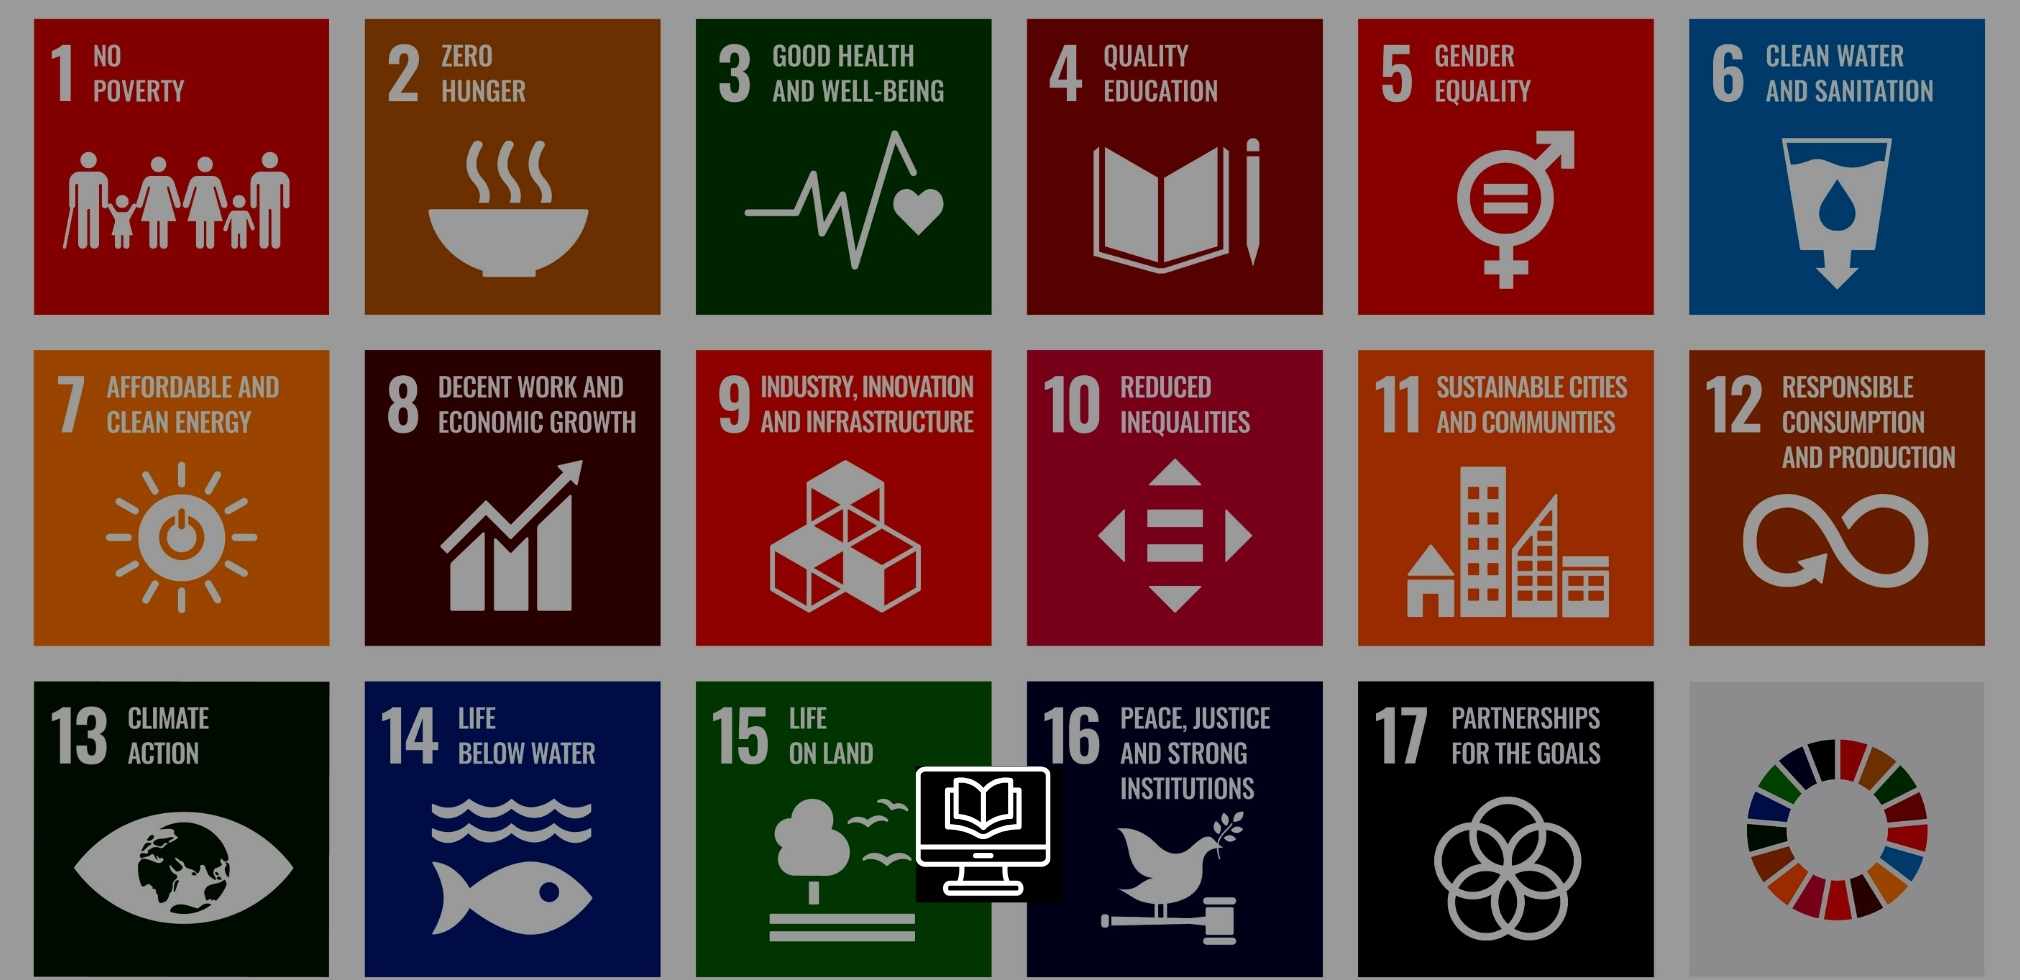 <h4>INTERACTIVE CASE STUDY<br>SOURCING SDG SOLUTIONS</h4>